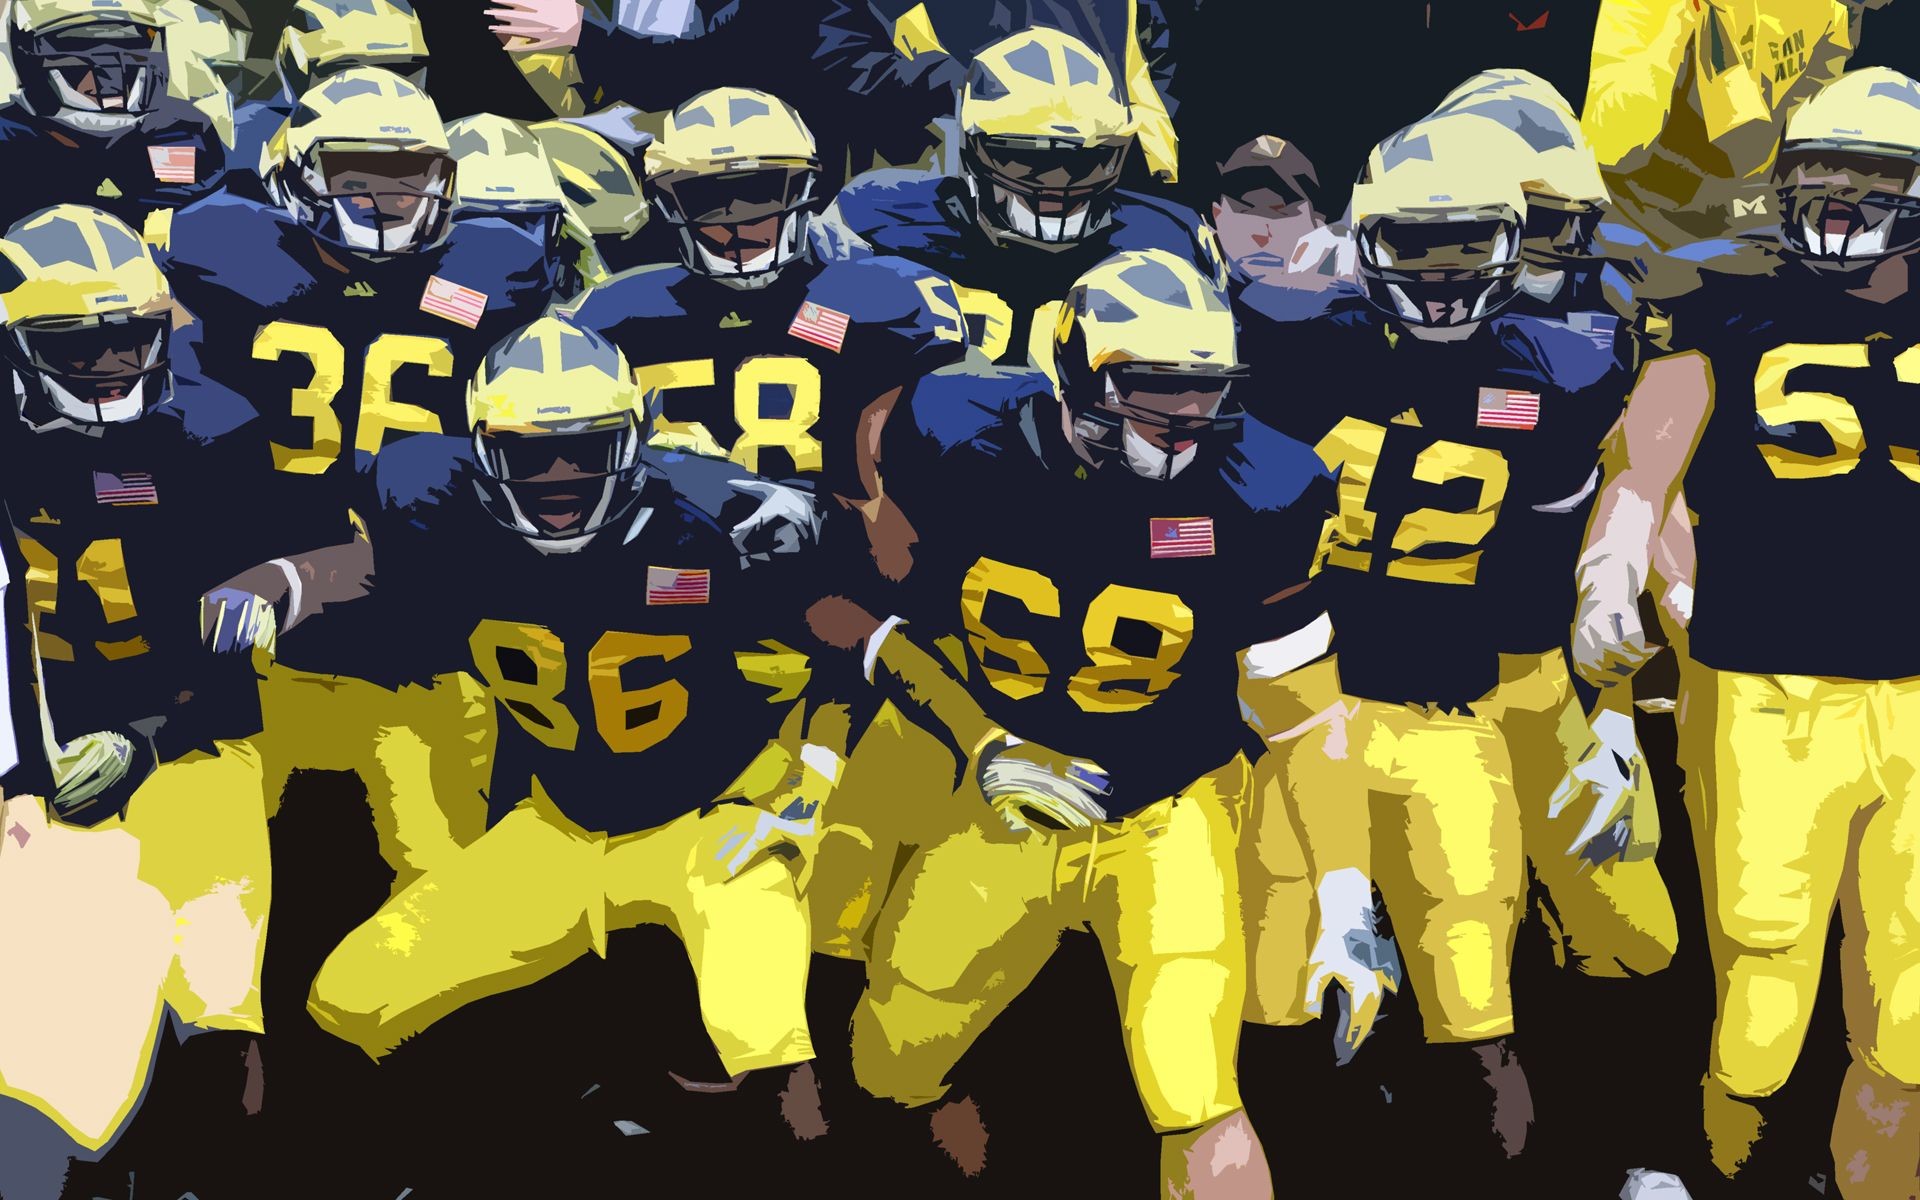 1920x1200 Marvelous Collections of Free Download Michigan Wolverines Football  Background For Desktop, Laptop and Mobiles.